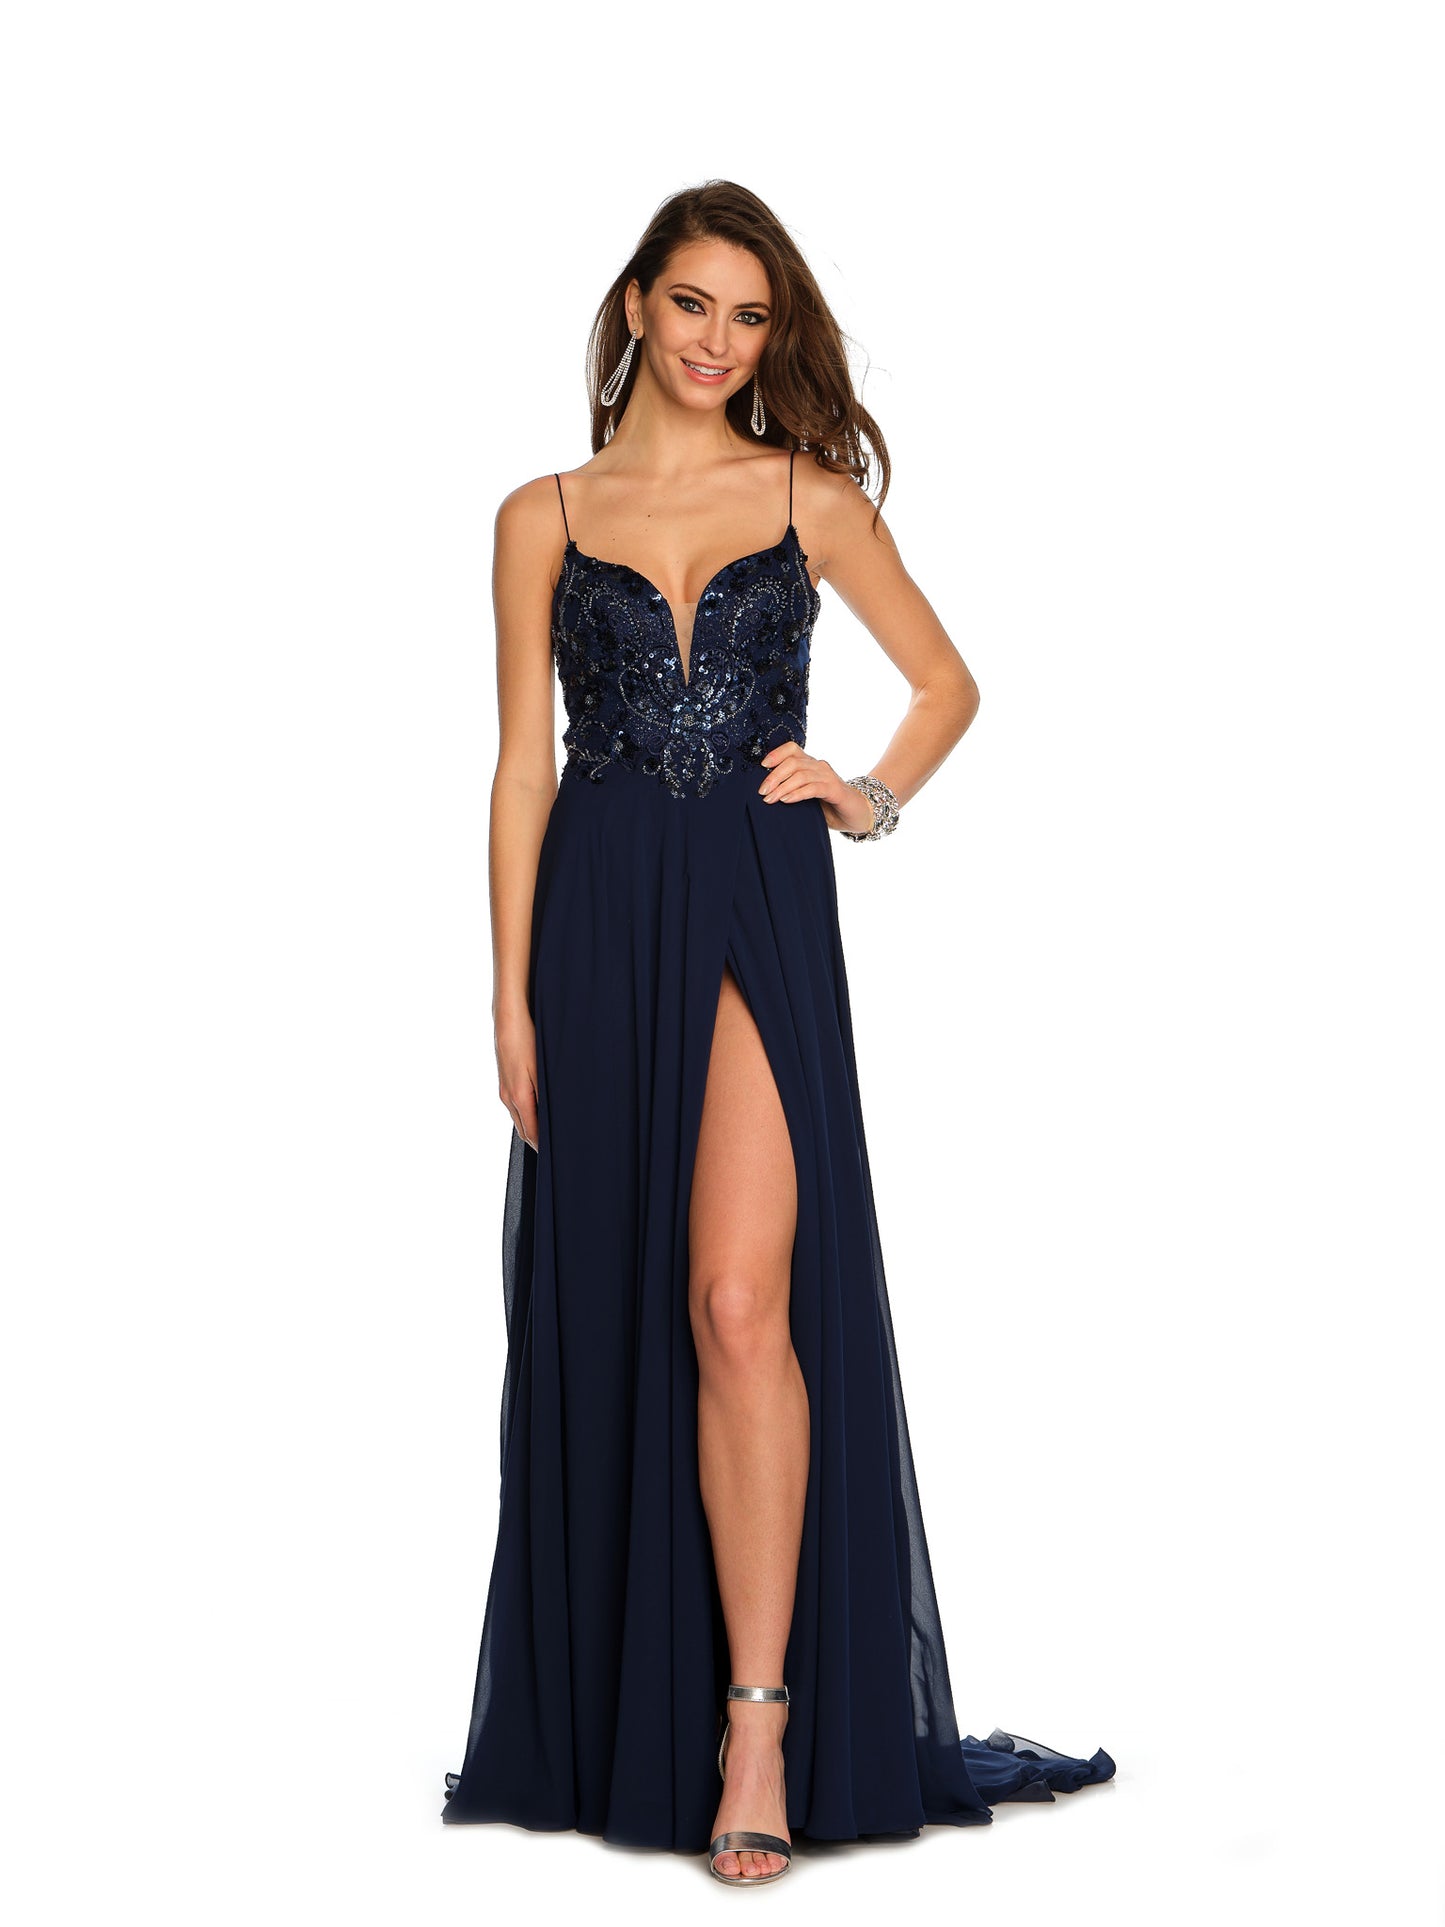 EMBROIDERED SEQUIN TOP FLOWY GOWN